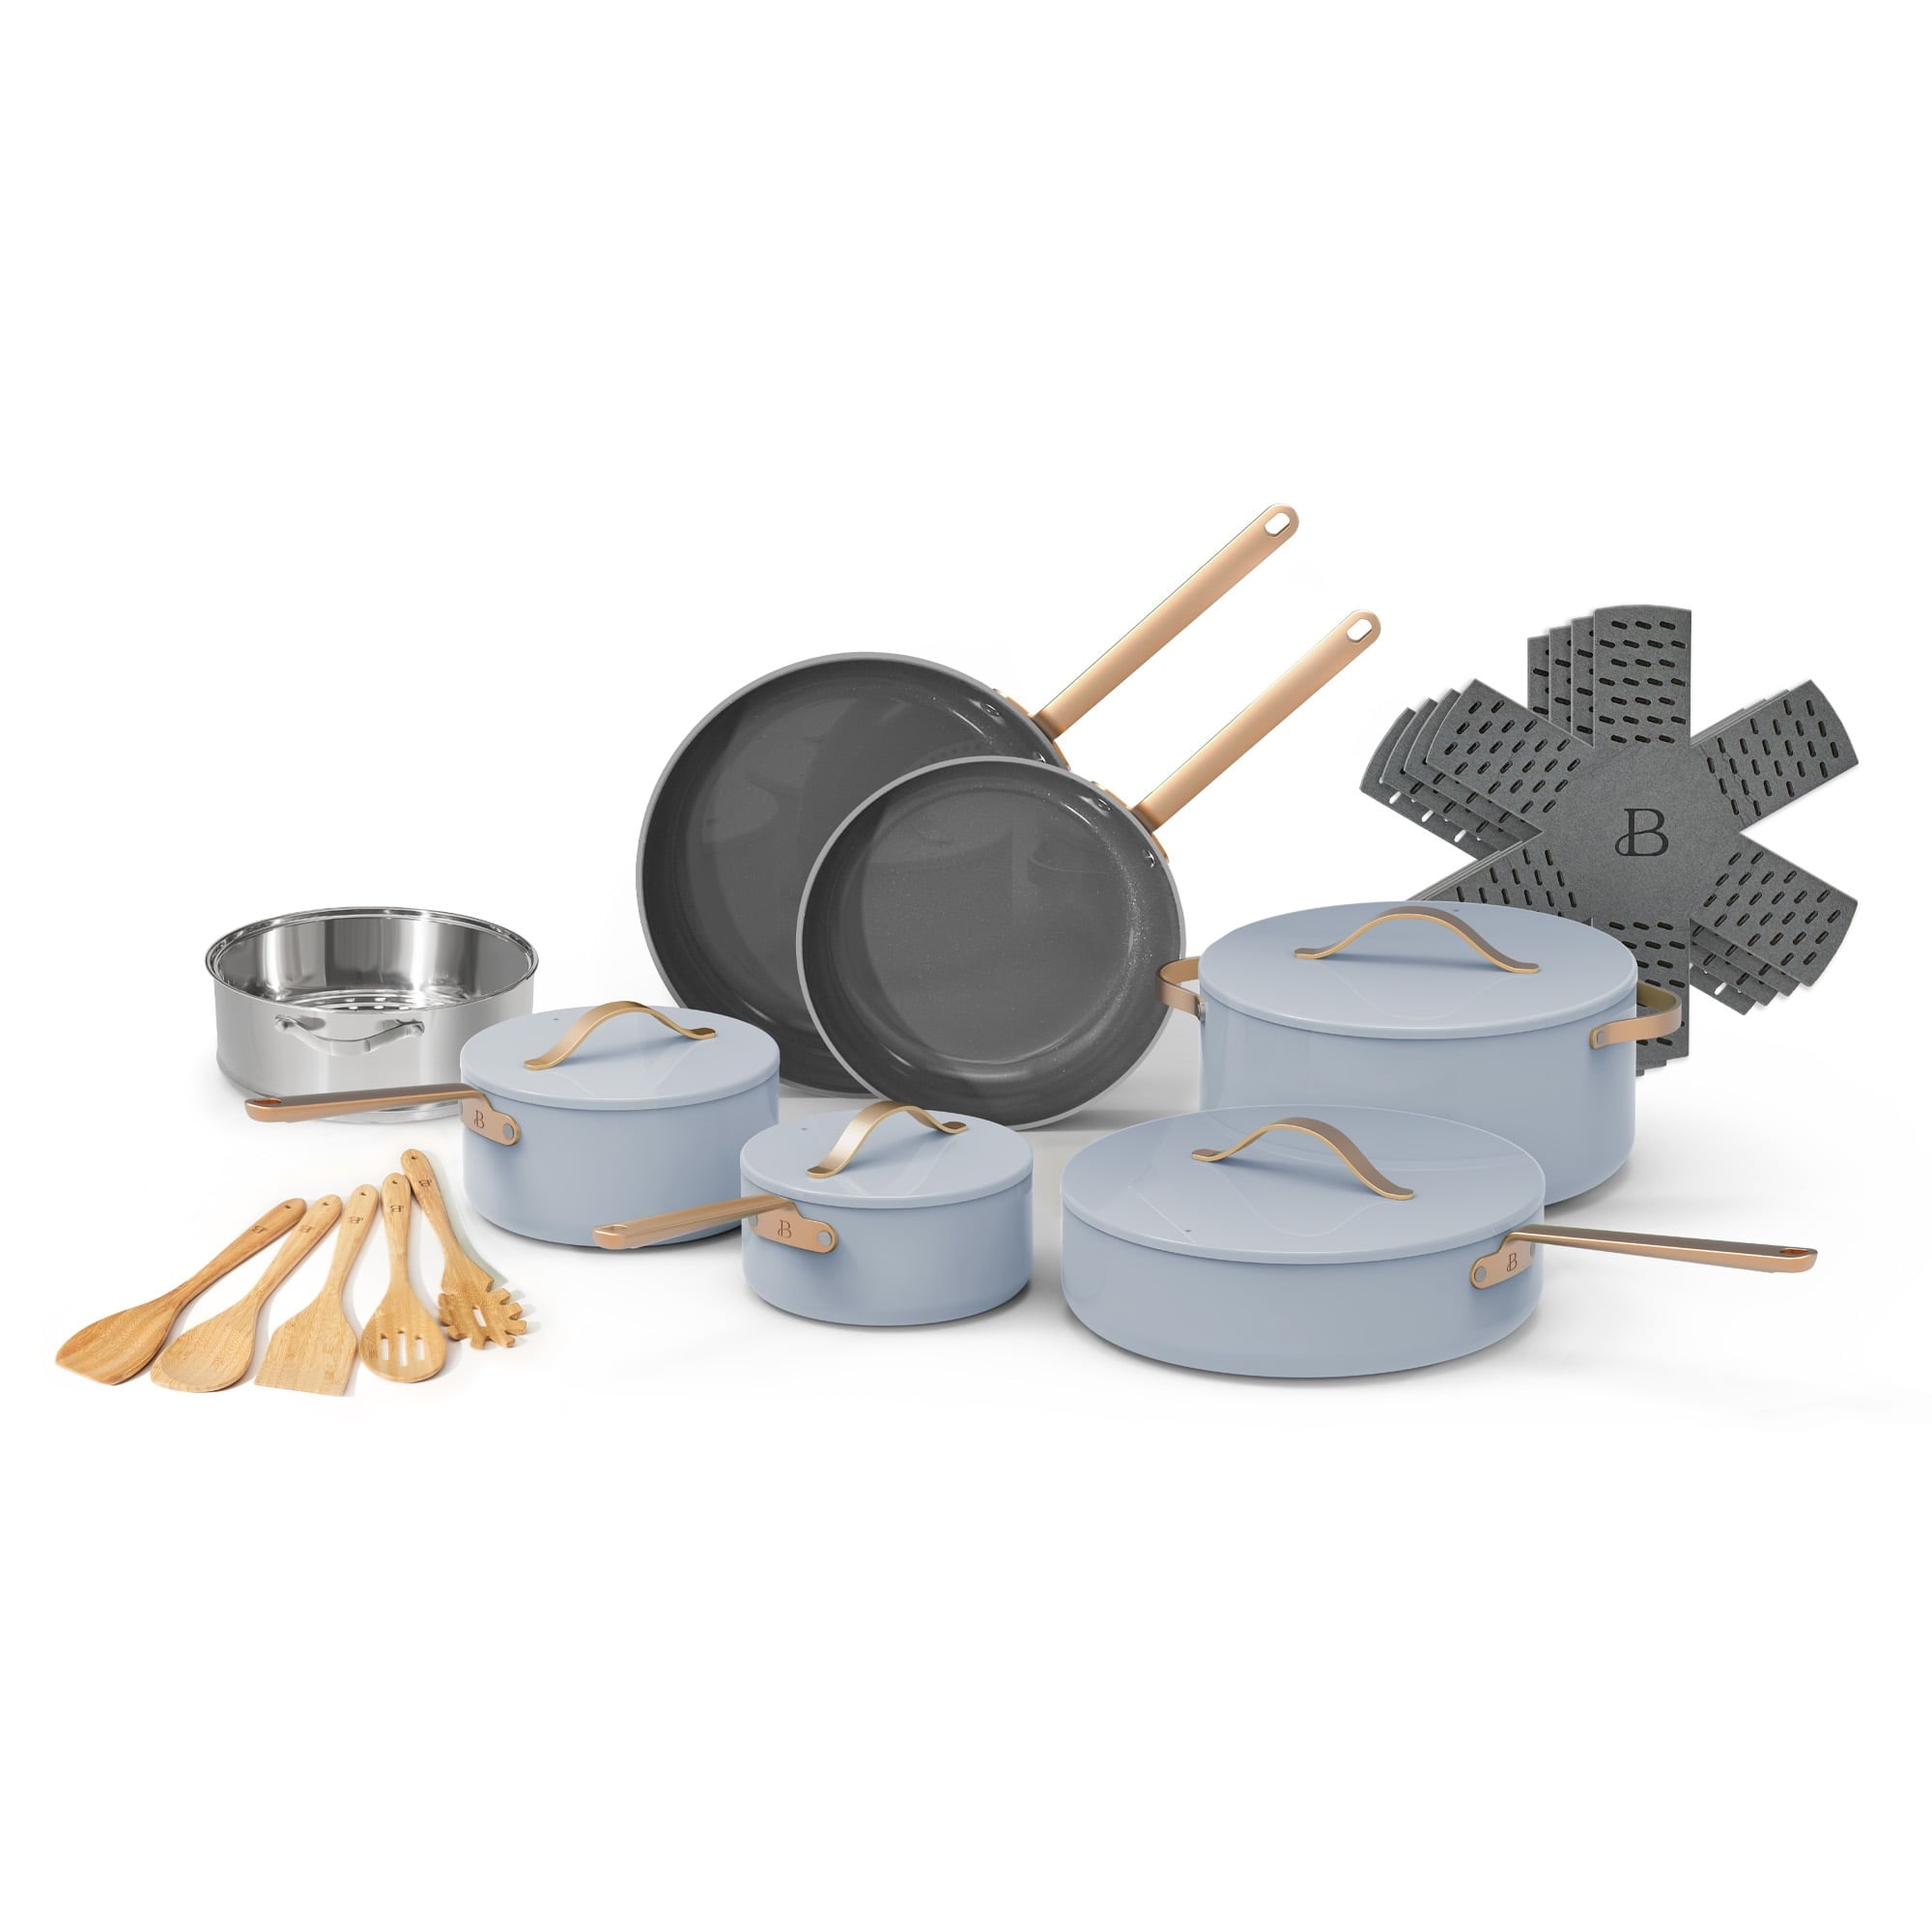 https://ak1.ostkcdn.com/images/products/is/images/direct/c53de55f74c9b4c88e89ab7caa09ae868dcb9761/20pc-Ceramic-Non-Stick-Cookware-Set%2C-Cornflower-Blue%2C-by-Drew-Barrymore.jpg